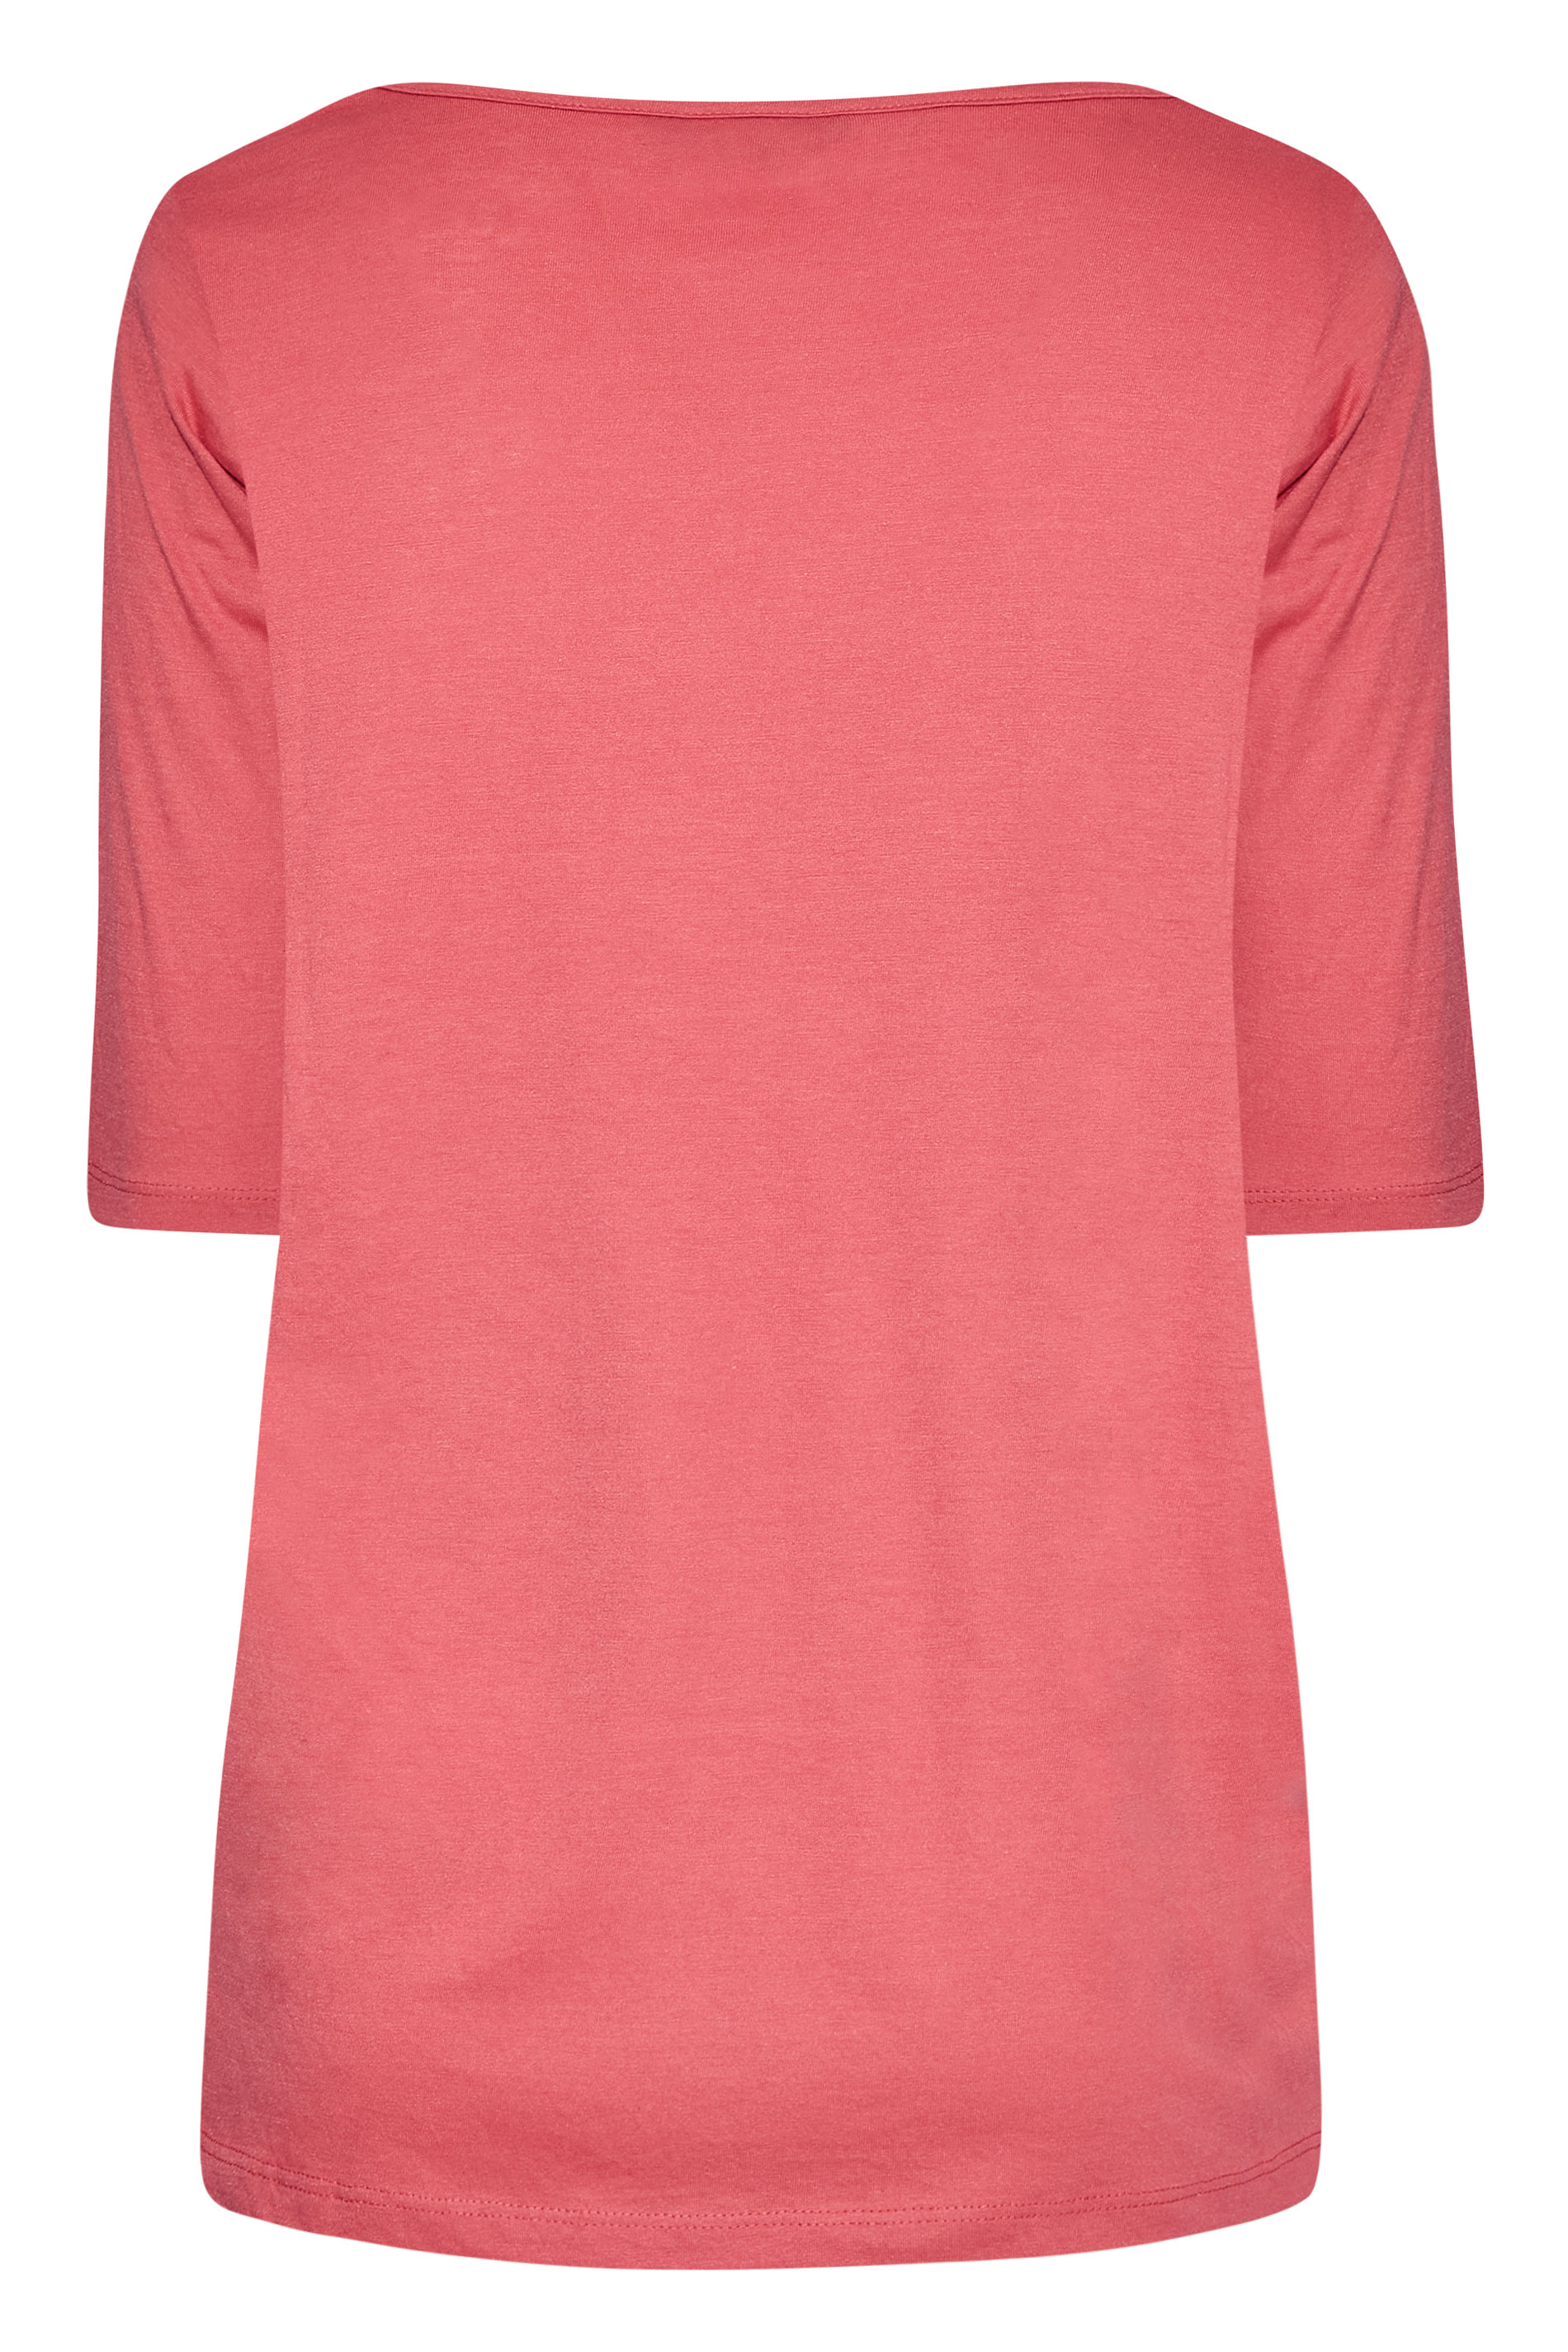 Grande taille  Tops Grande taille  T-Shirts | T-Shirt Rose Col V Manches Longues - FE09512